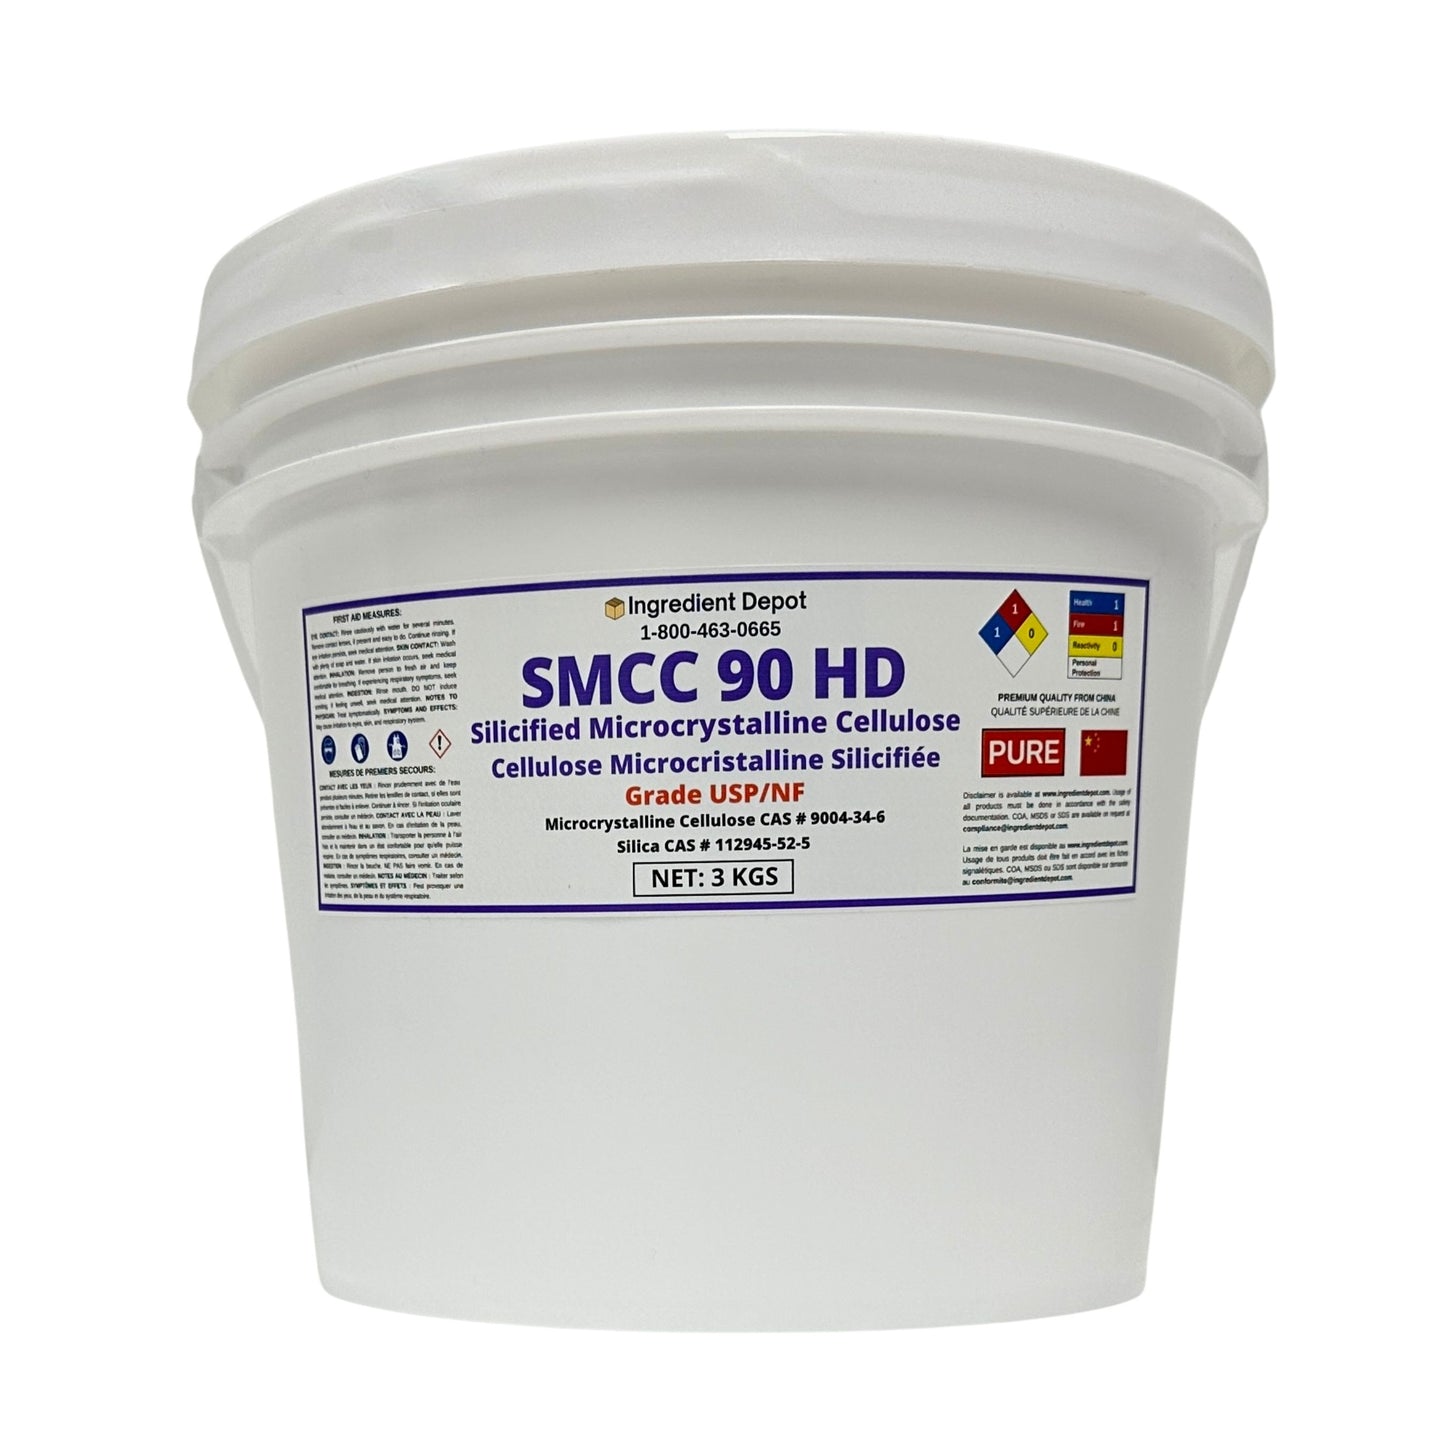 SMCC 90 HD Silicified Microcrystalline Cellulose - USP/NF Grade 3 kgs - Ingredient Depot